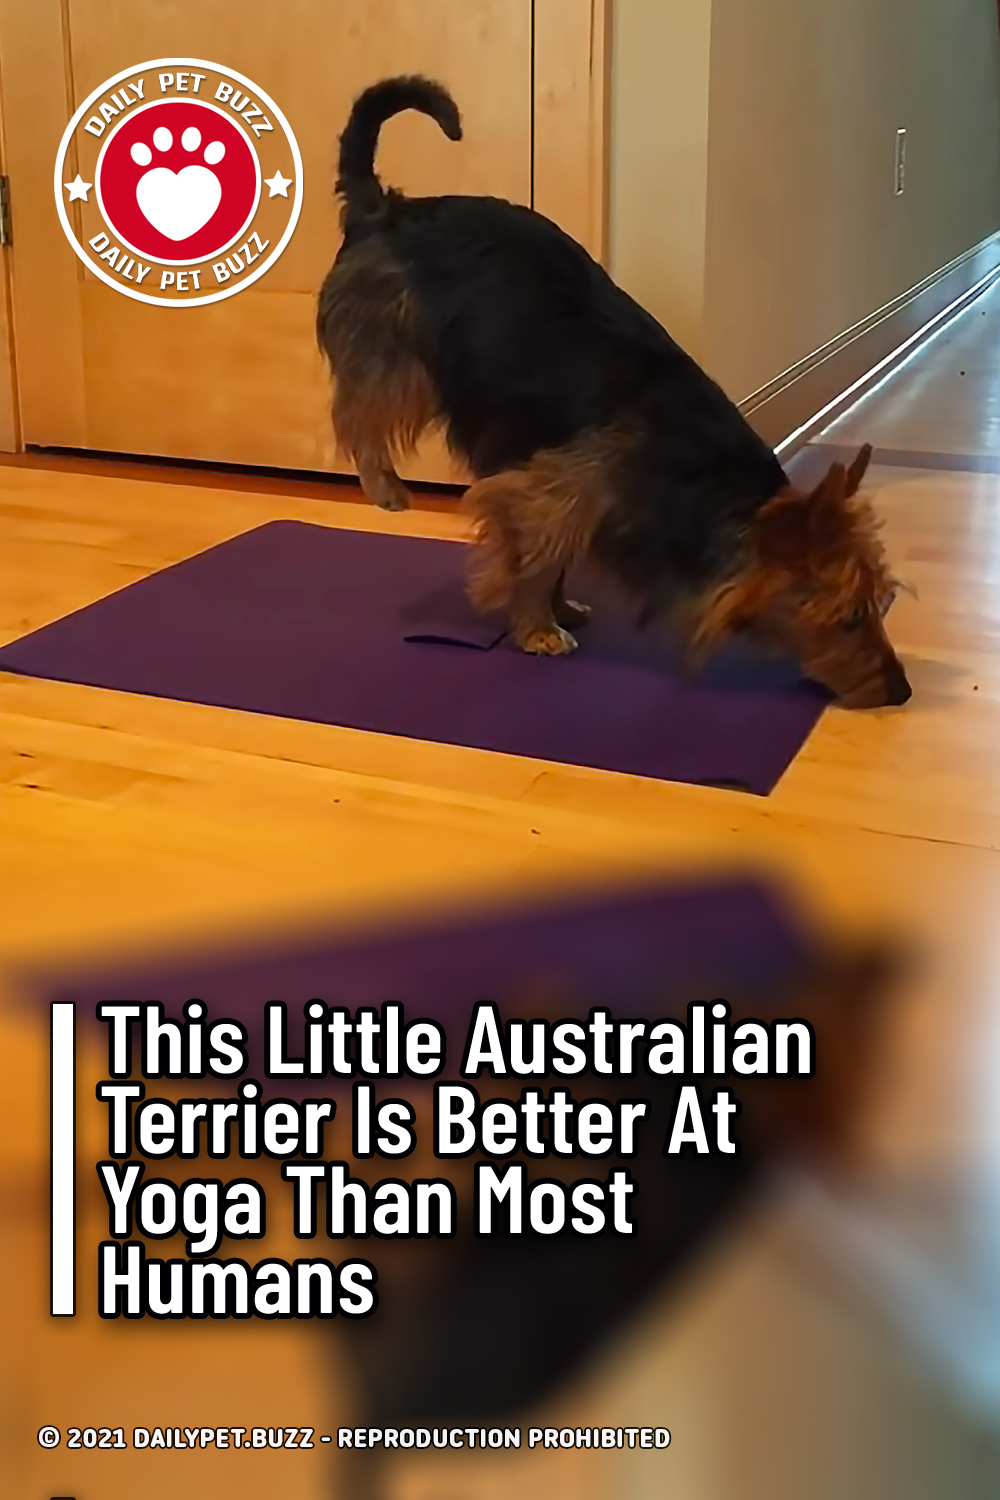 This Little Australian Terrier Is Better At Yoga Than Most Humans